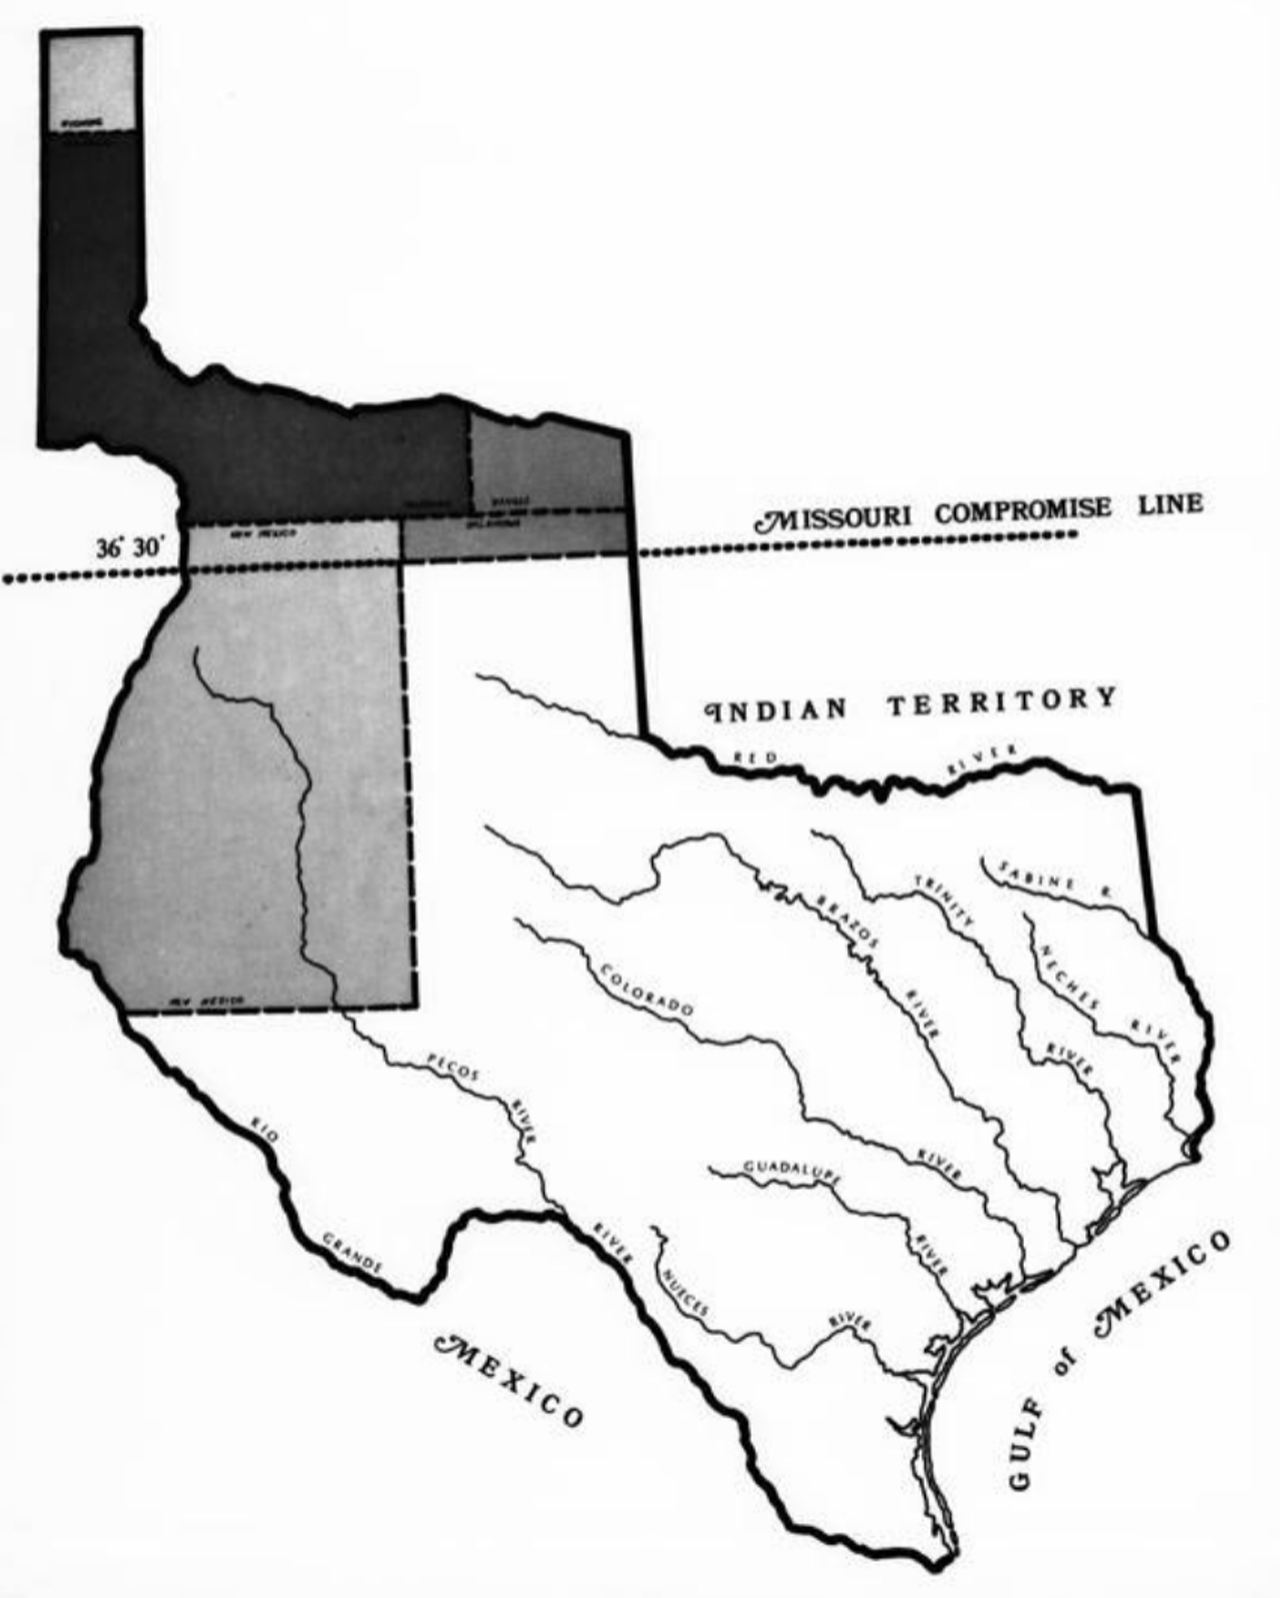 The Compromise of 1850 really saved Texas’ ass.
Thanks to this document, Texas received about $10 million from the U.S. government to settle its debts it acquired as a country. But first, Texas had to give up about one-third of its land.
Photo via UTSA Libraries Special Collections